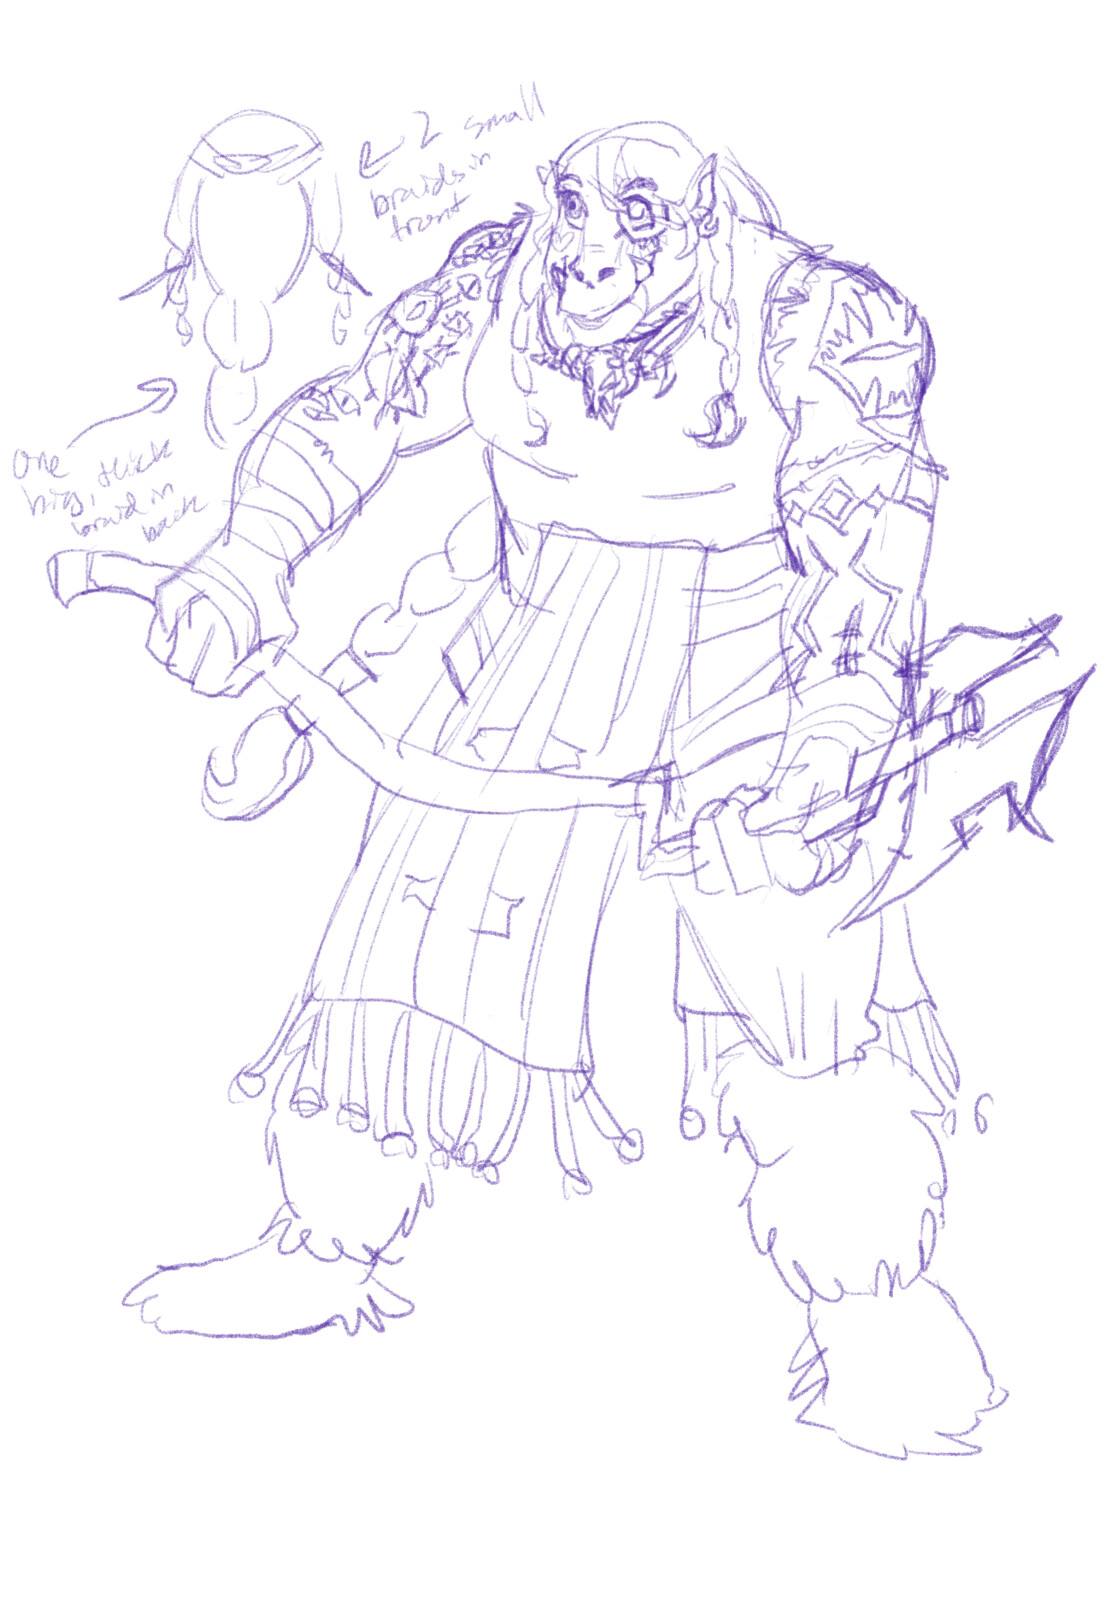 Ovik, the half-orc barbarian, was the most difficult for me. At first I was thinking of something more like a boar